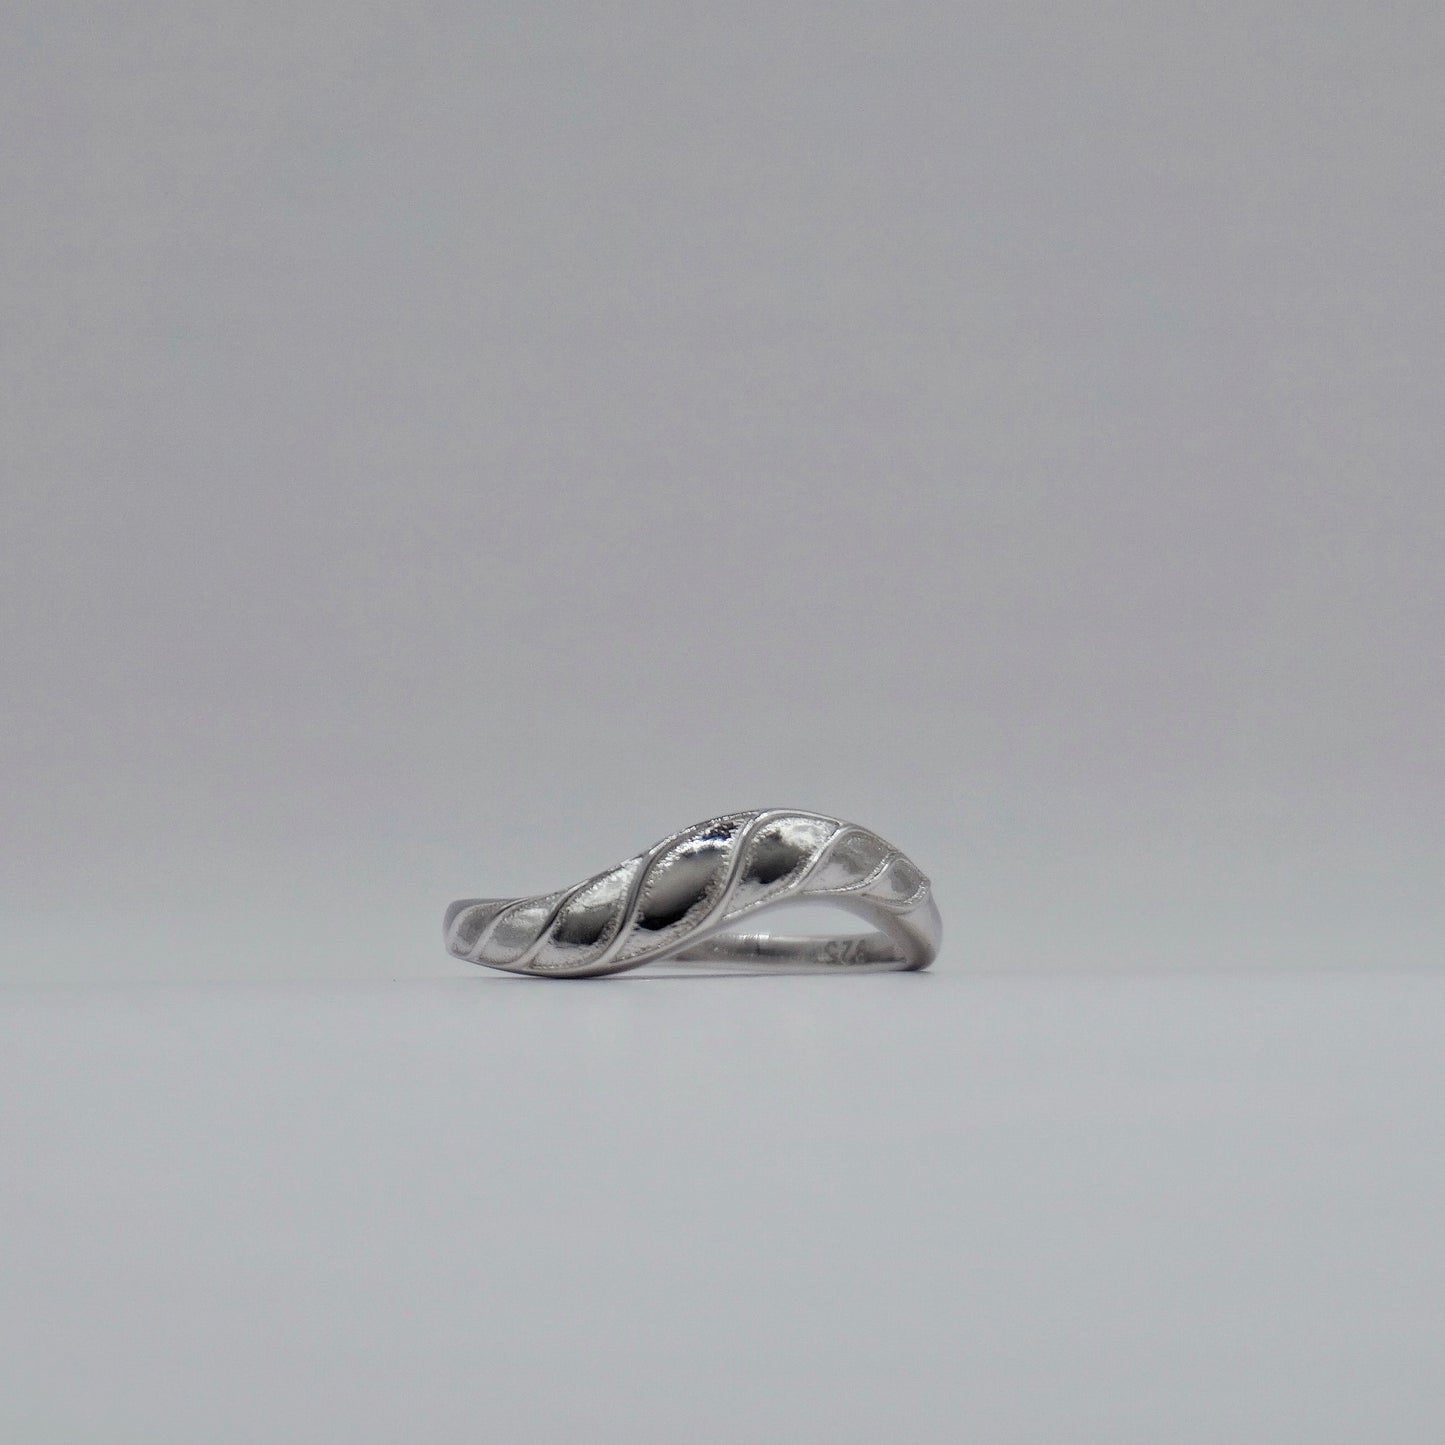 Cleo Ring II in Silver